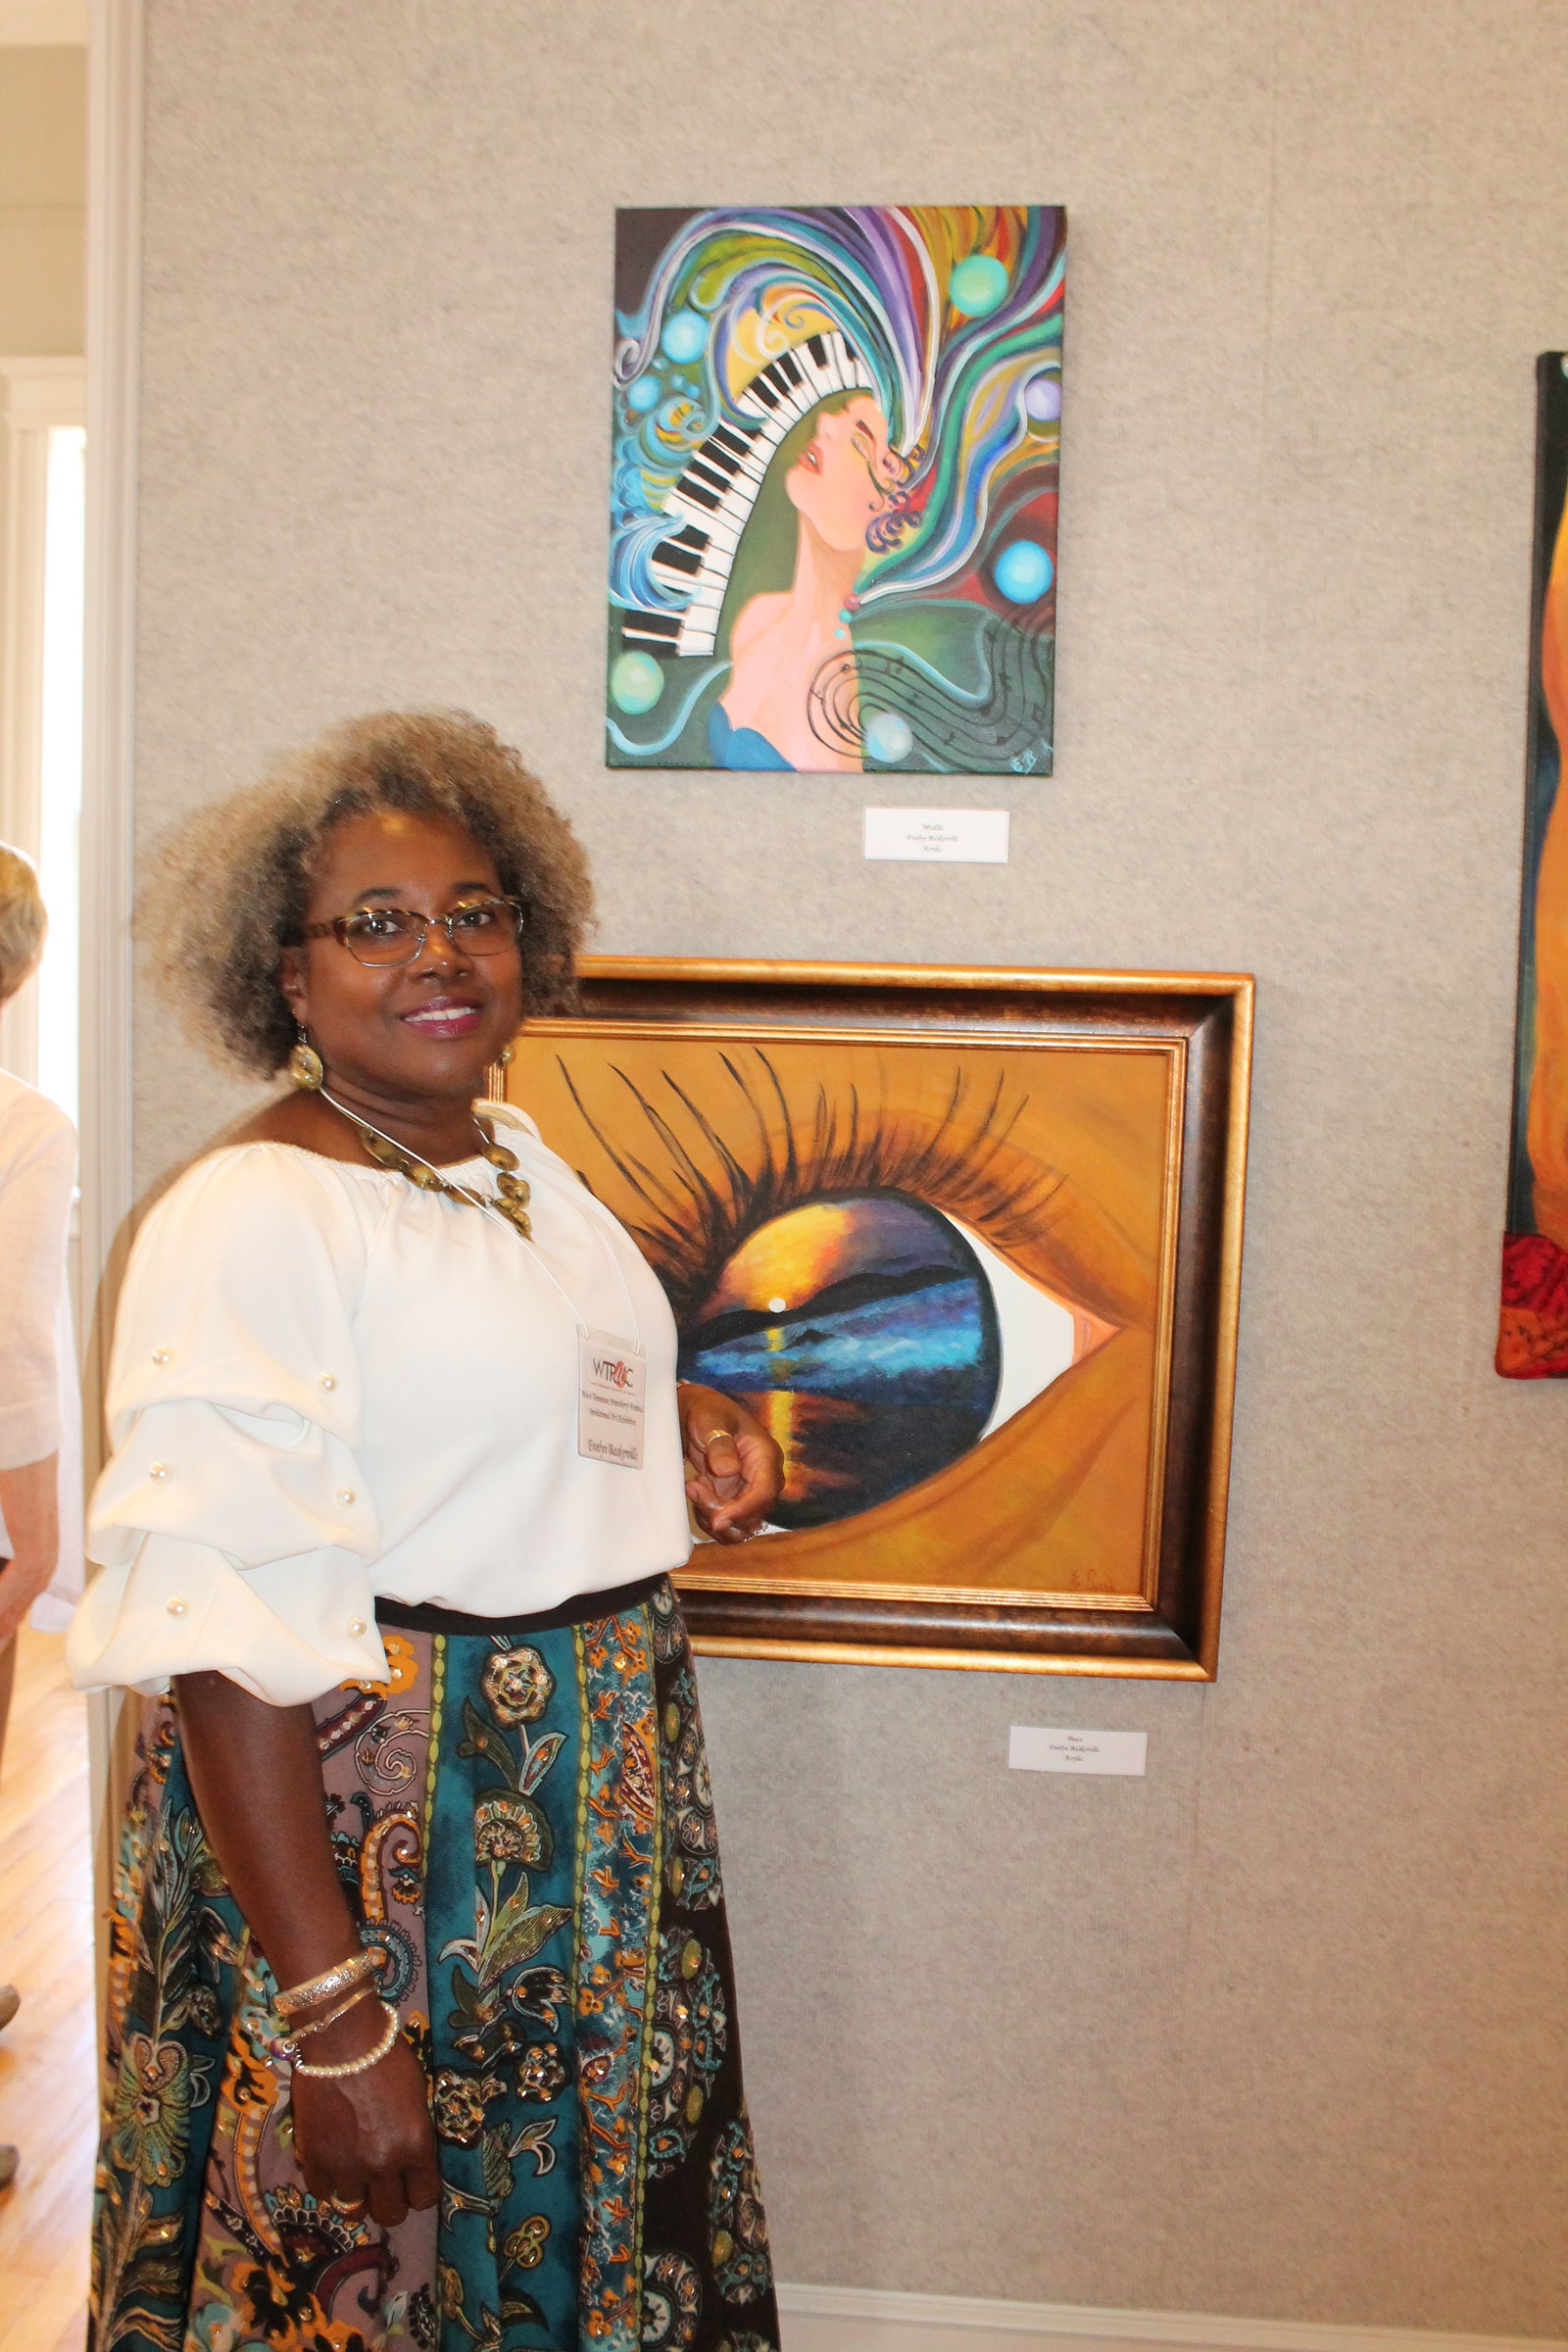 West Tennessee Strawberry Festival - Art Show - Evelyn Baskerville